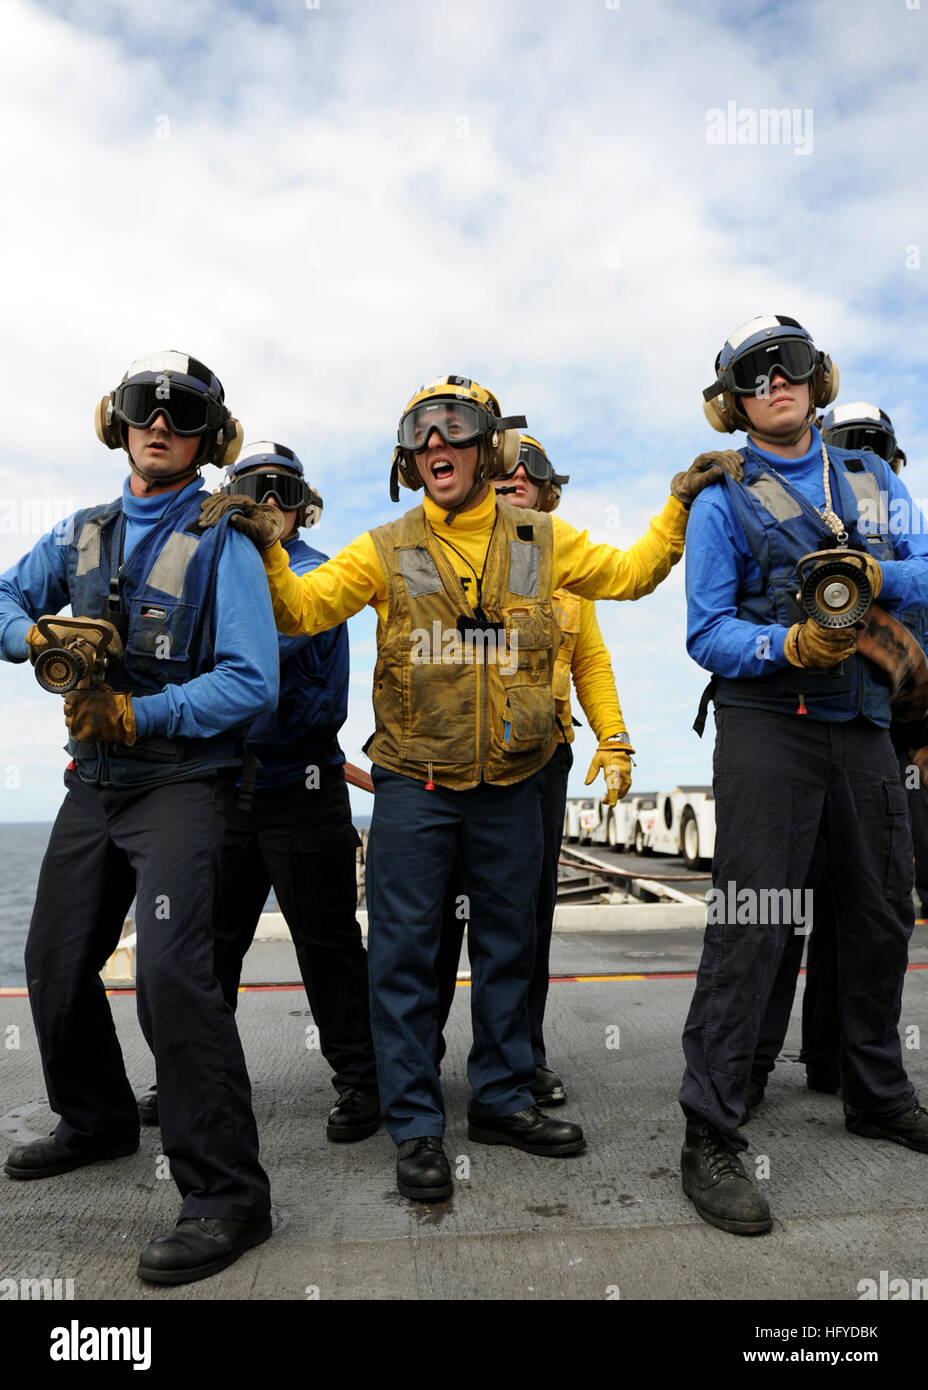 100908-N-5386R-134  PACIFIC OCEAN (Sept. 8, 2010) Sailors fight a simulated fire during airplane crash training aboard the aircraft carrier USS Abraham Lincoln (CVN 72). The Lincoln Strike Group is conducting maritime security operations and theater security cooperation efforts. (U.S. Navy photo by Mass Communication Specialist 3rd Class Robert Robbins/Released) US Navy 100908-N-5386R-134 Sailors fight a simulated fire during airplane crash training aboard the aircraft carrier USS Abraham Lincoln (CVN 72) Stock Photo